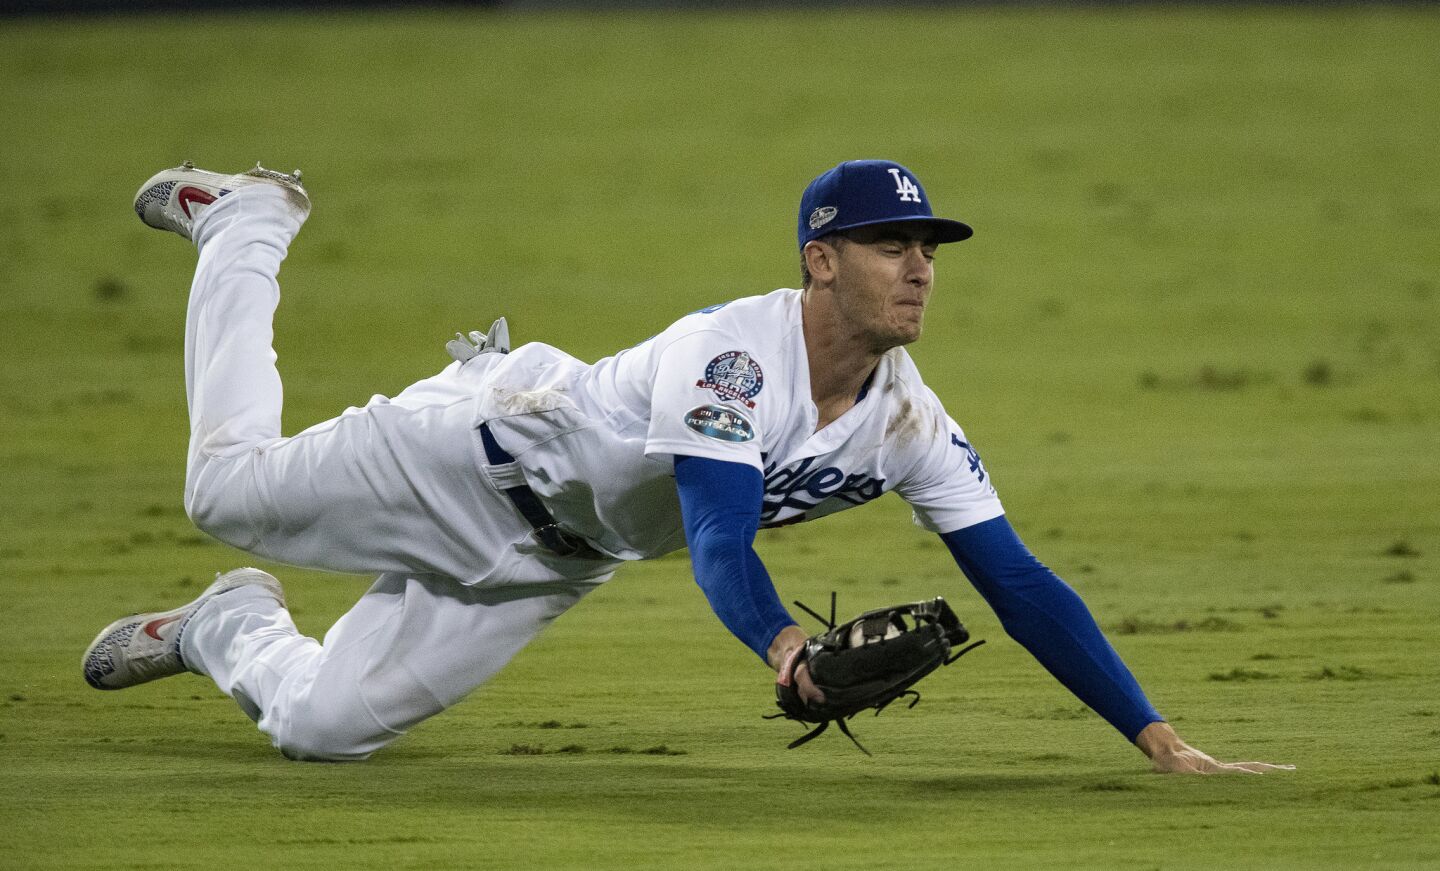 Dodgers center fielder Cody Bellinger makes a diving catch on a hit by Brewers center fielder Lorenzo Cain in the ninth inning.